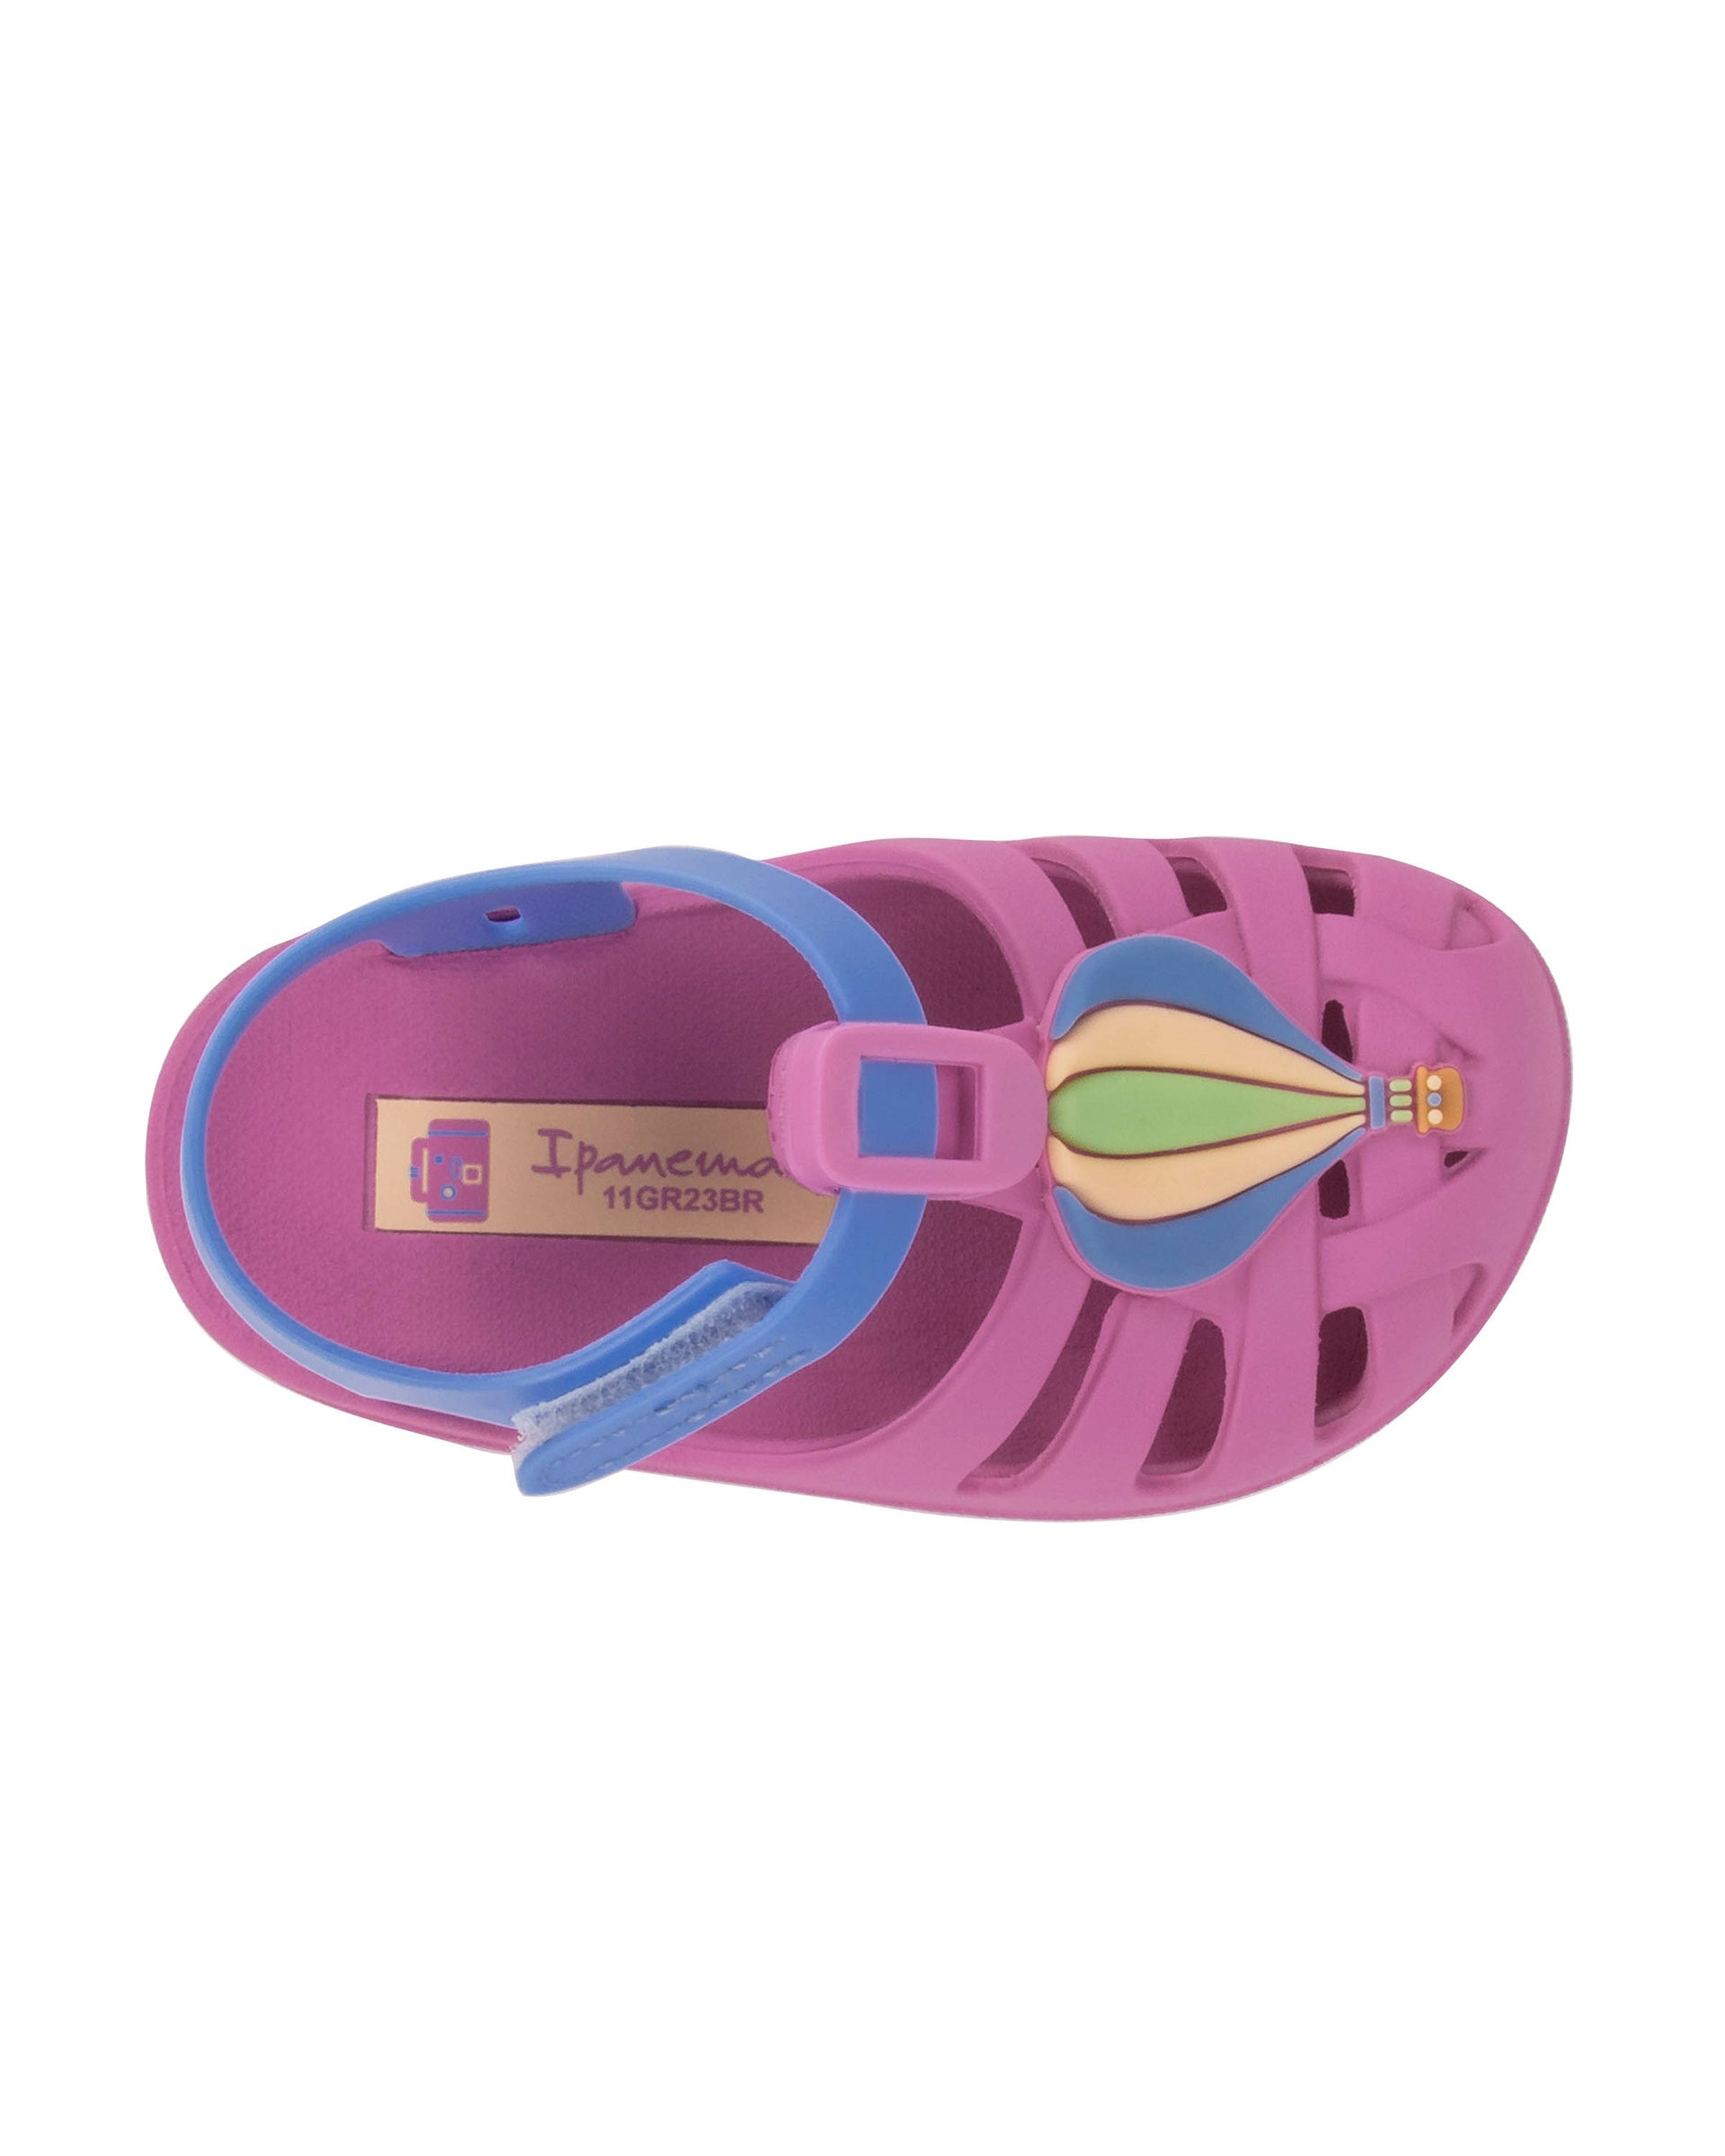 Top view of a purple Ipanema Summer baby sandal with hot air balloon on the upper.